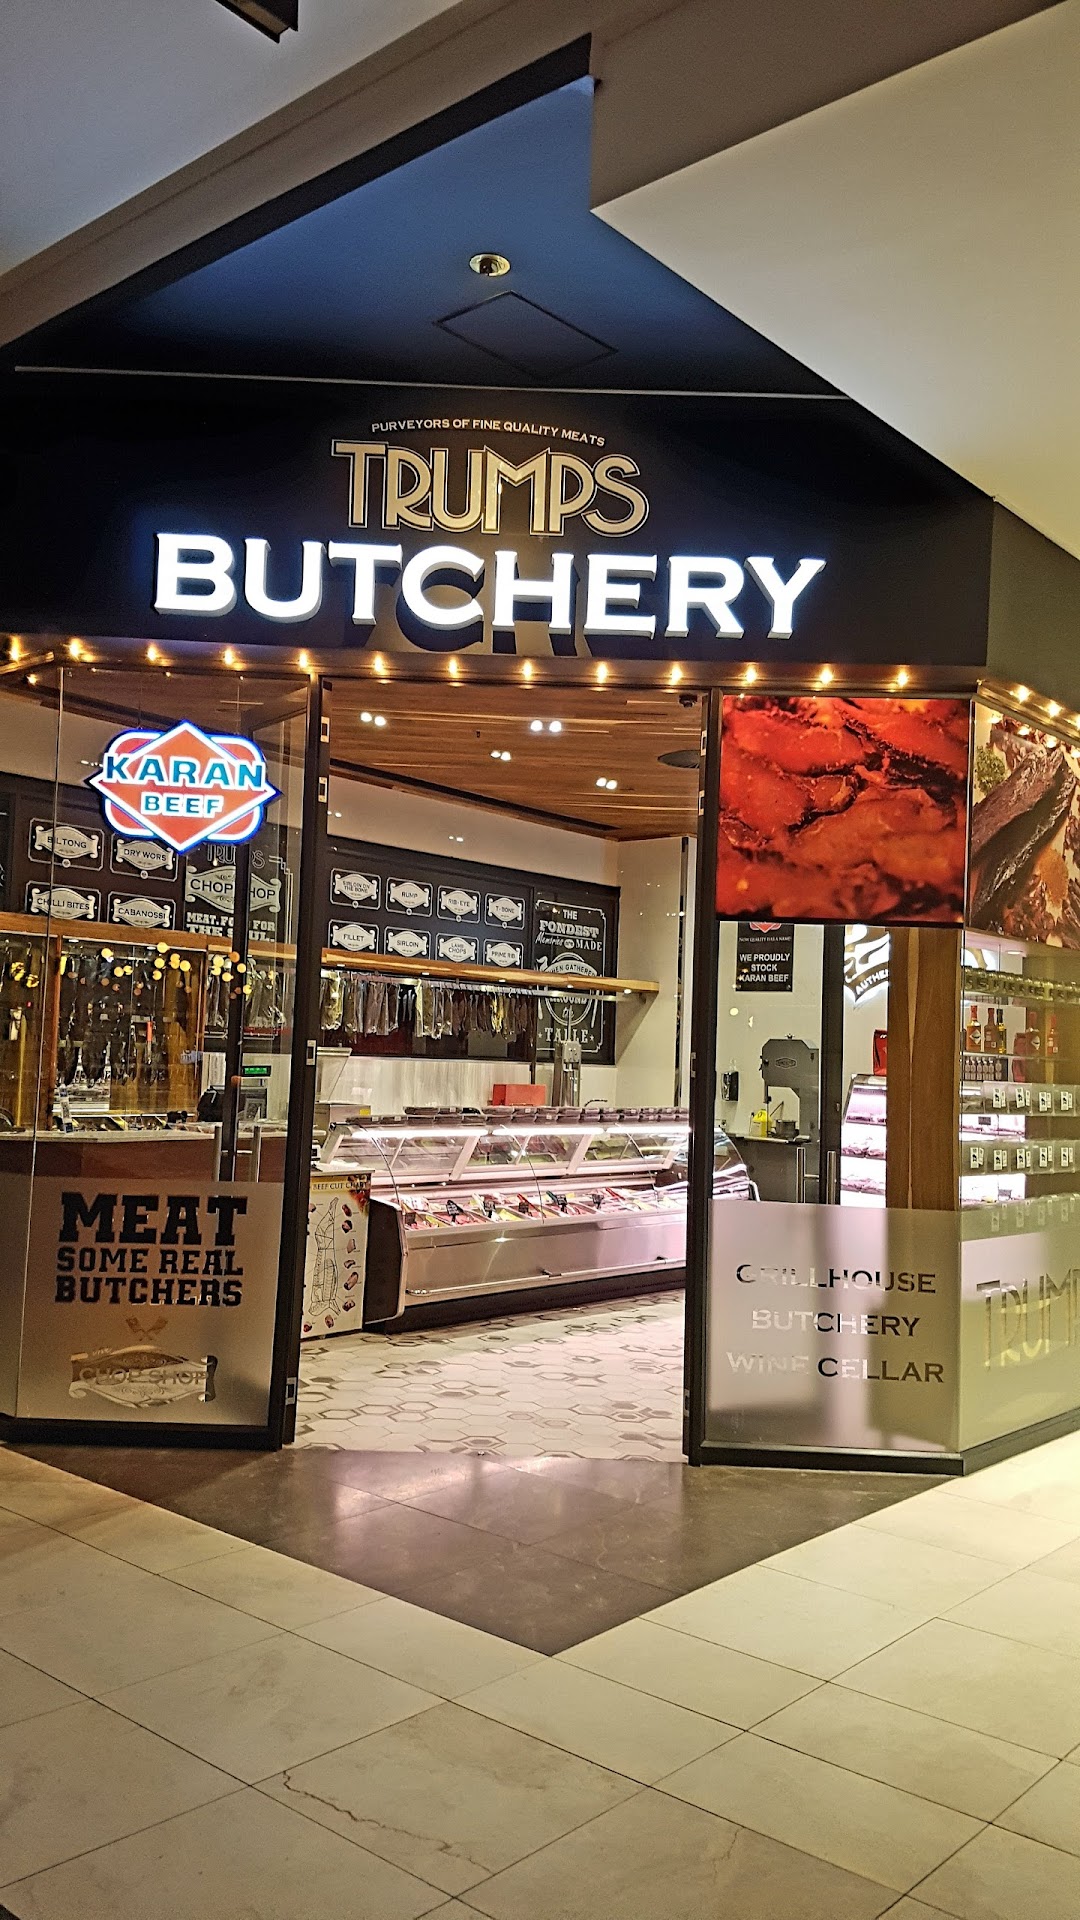 Trumps Grillhouse and Butchery